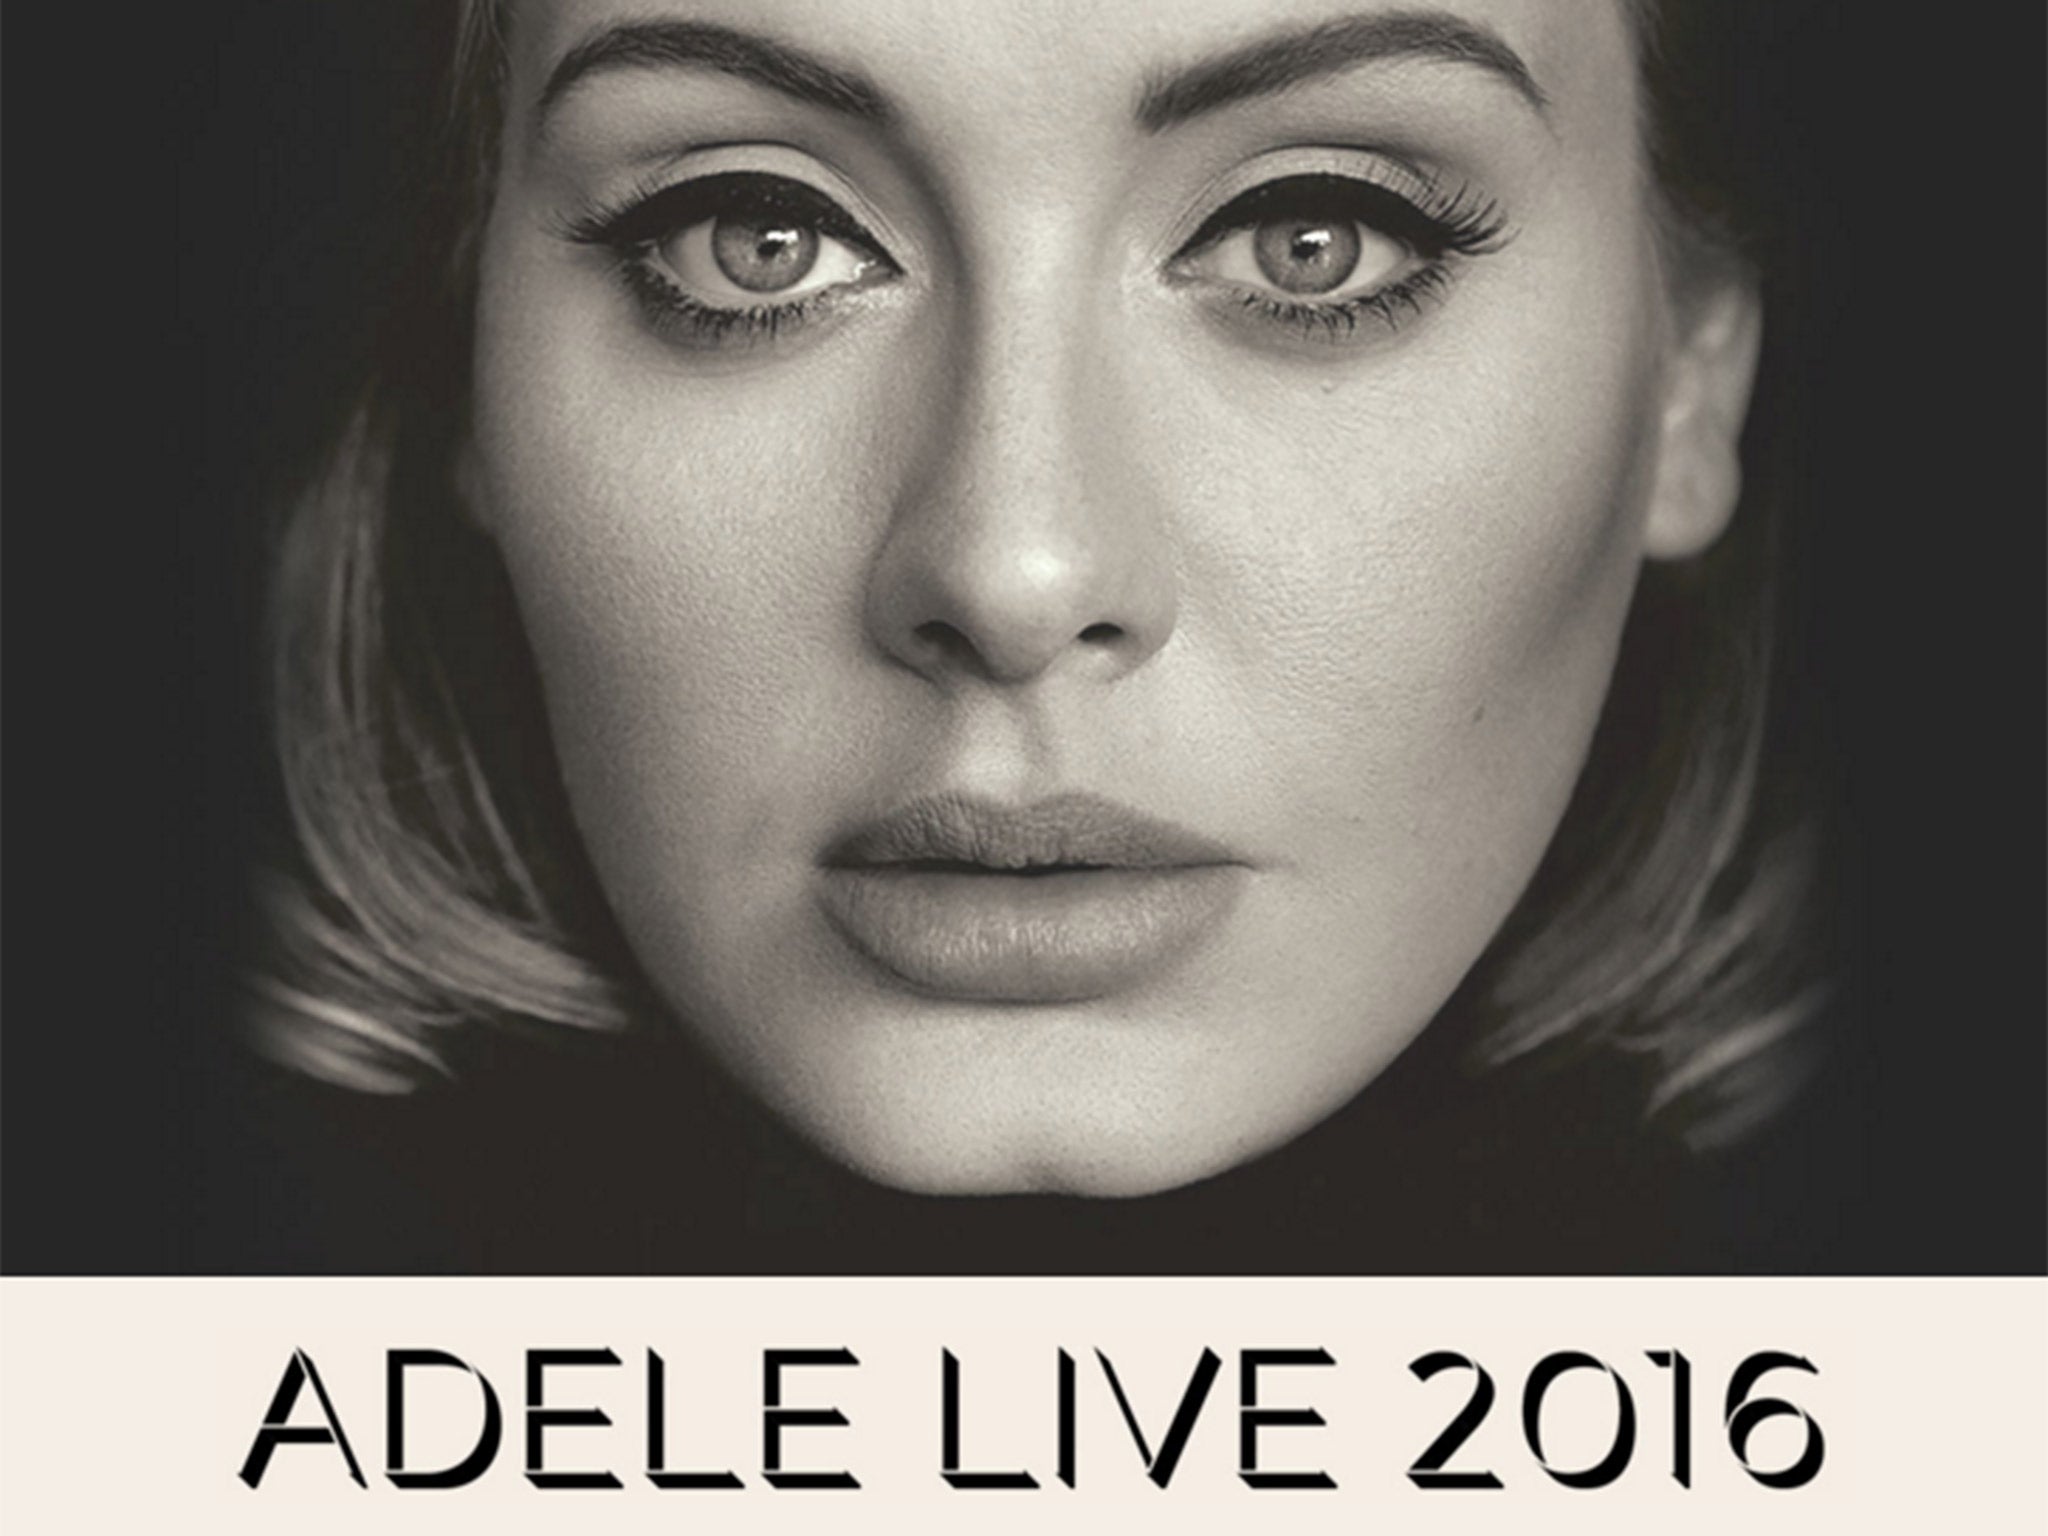 Adele is toppling the touts by selling tickets through her own website